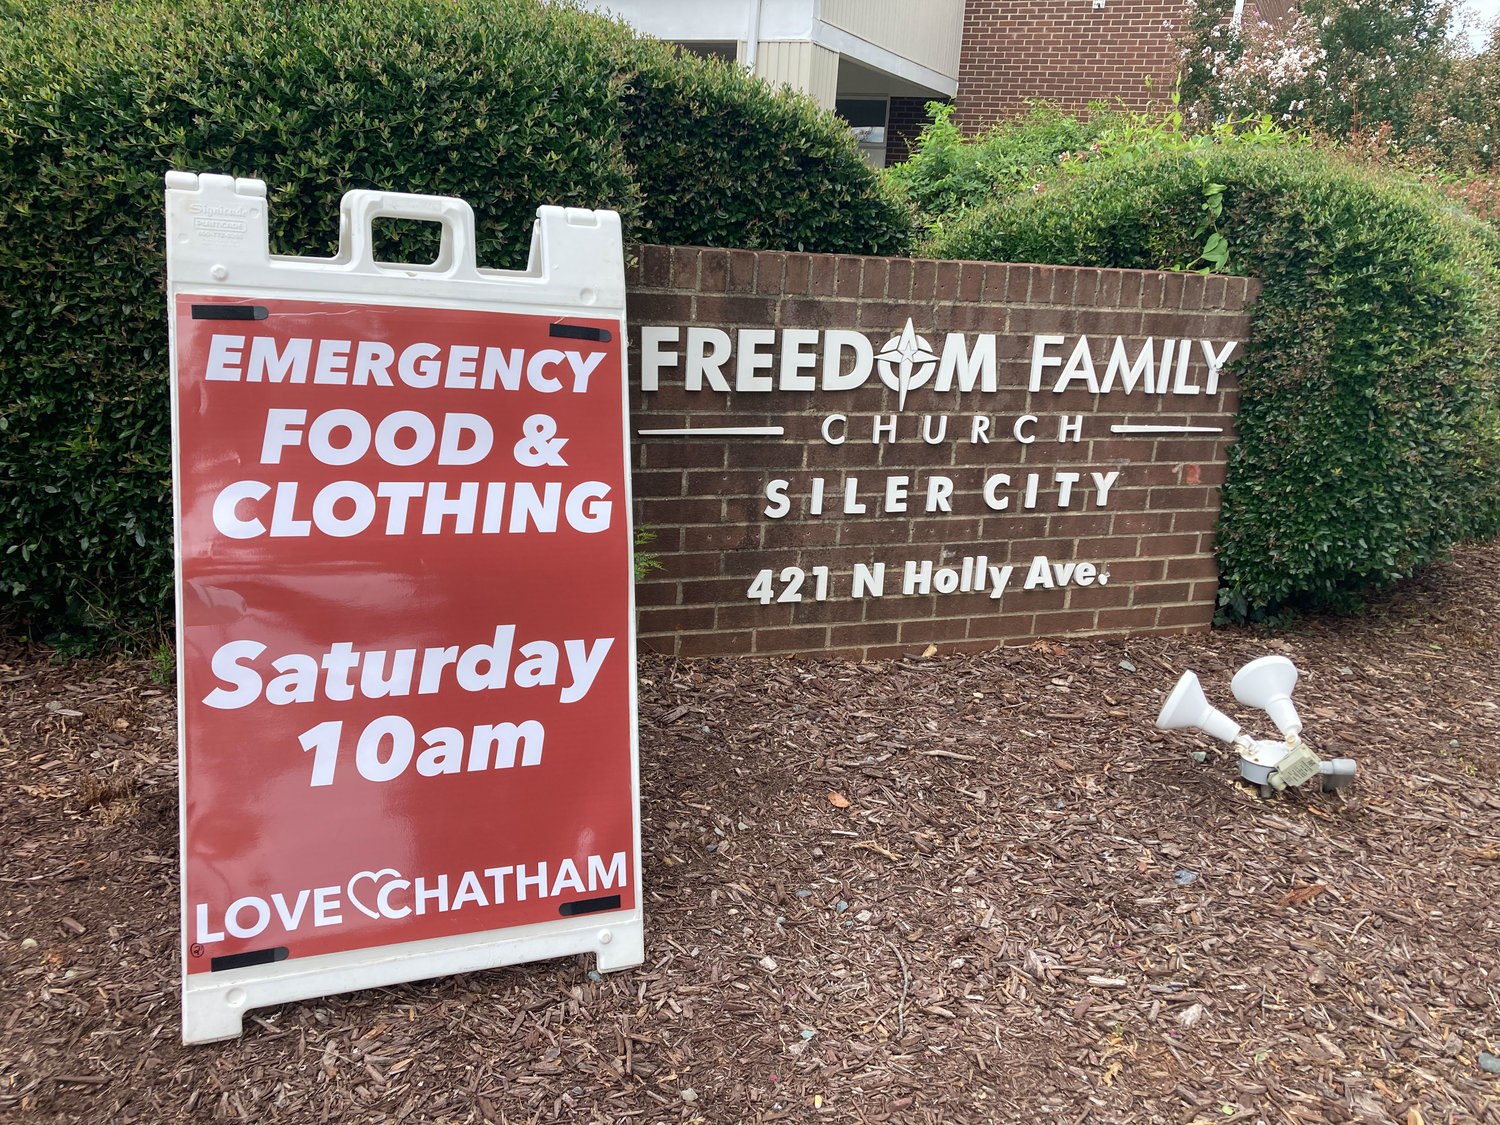 Love Chatham, housed at Freedom Family Church in Siler City, works to help those who need shelter, food or clothing.